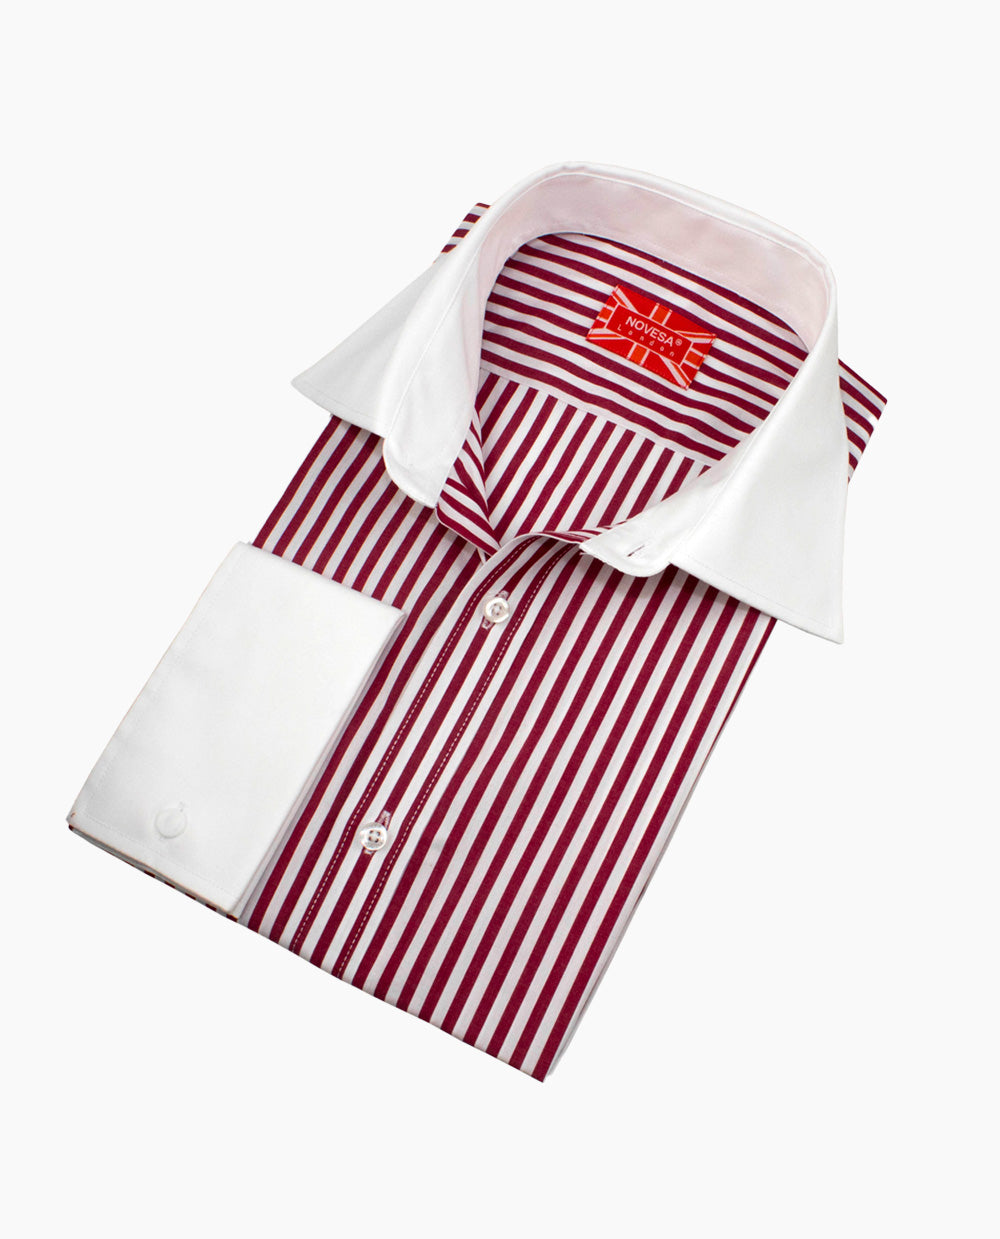 Red and White Contrast Collar and Cuff Shirt